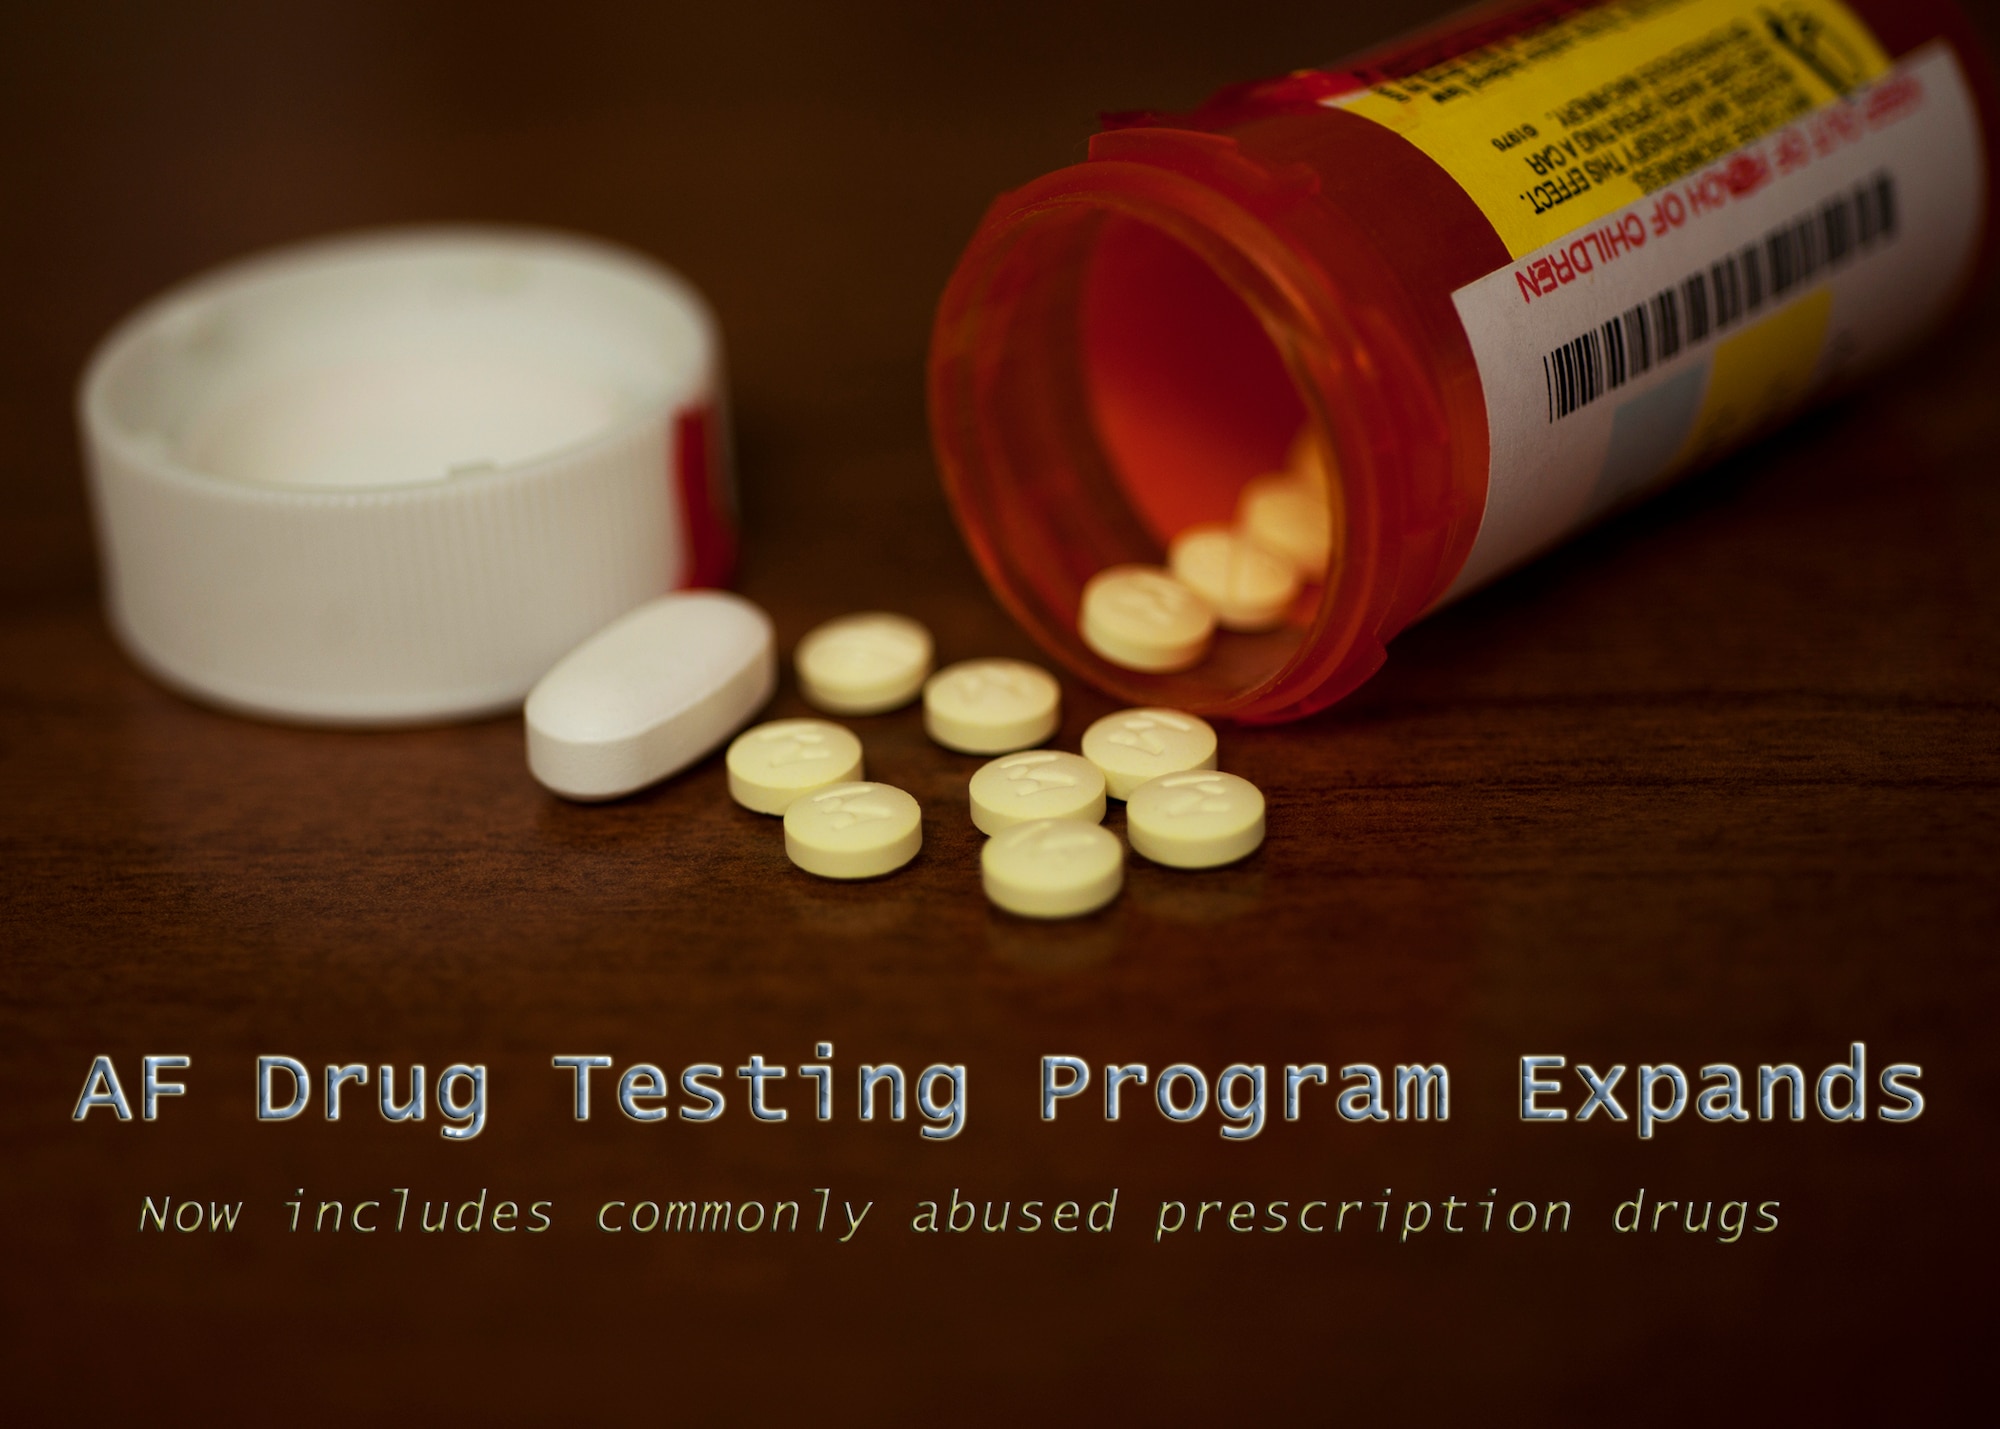 Beginning May 1, military services will expand their drug testing to include commonly abused prescription drugs. The Air Force’s zero tolerance policy on drug abuse is not new, but the recently modified program reinforces that taking controlled medications in a manner other than how they are prescribed is illegal and can be detected using the new tests. (U.S. Air Force illustration by Senior Airman Eileen Meier/Released)